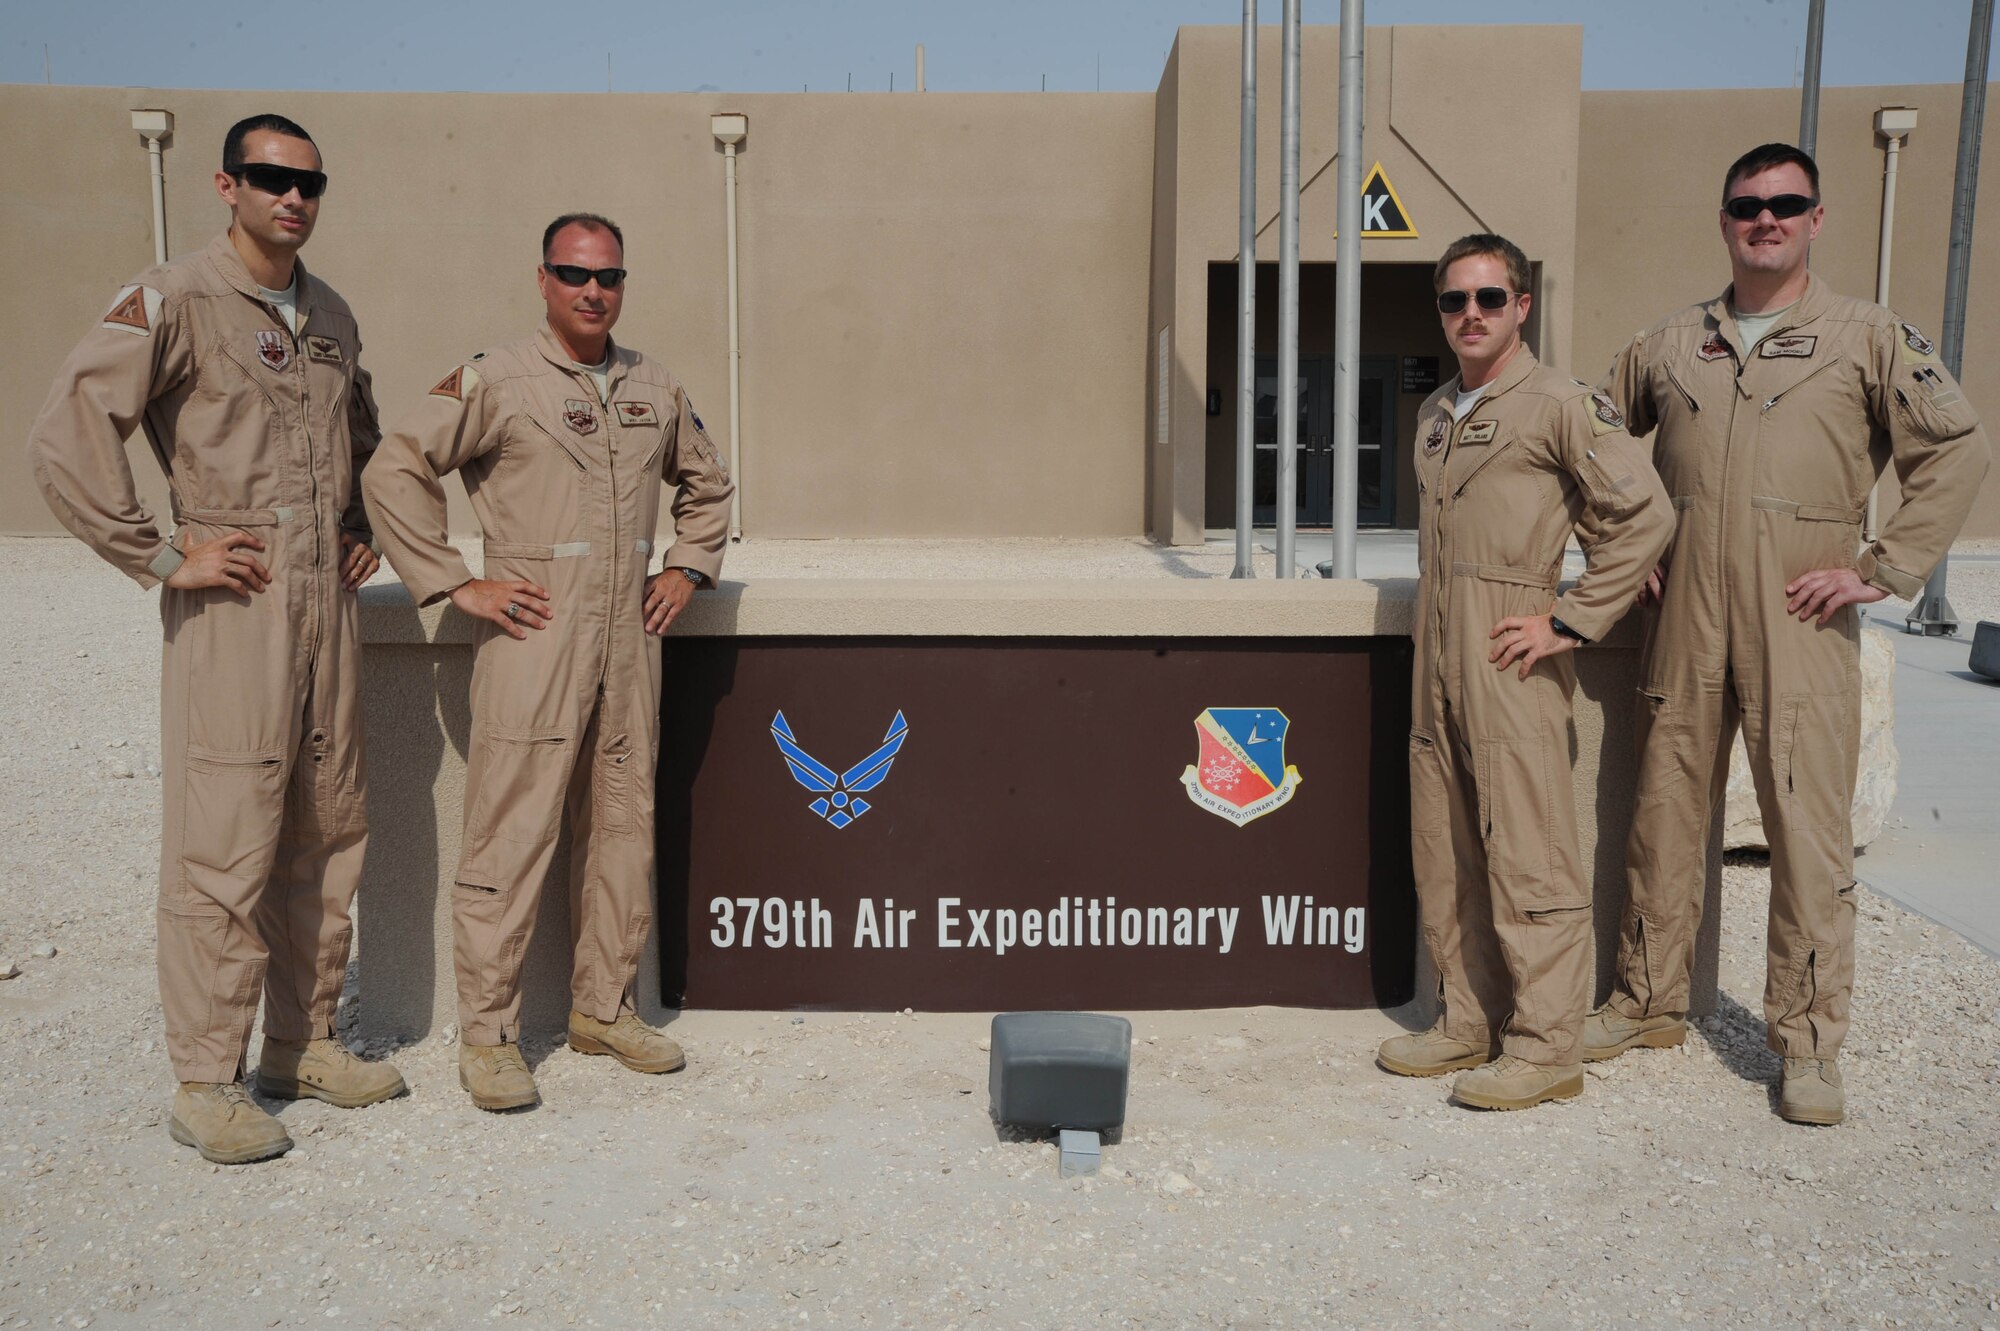 Members of the 379th Air Expeditionary Wing plans and programs pose for a photo at the 379th AEW in Southwest Asia, July 16, 2013. The 379th AEW XP can be broken down into four major functional areas: developing and managing contingency plans for the wing and higher headquarters; the focal point for missions entering and exiting the installation; exercise development and execution; and self-inspection program management. (U.S. Air Force photo/Senior Airman Bahja J. Jones) 